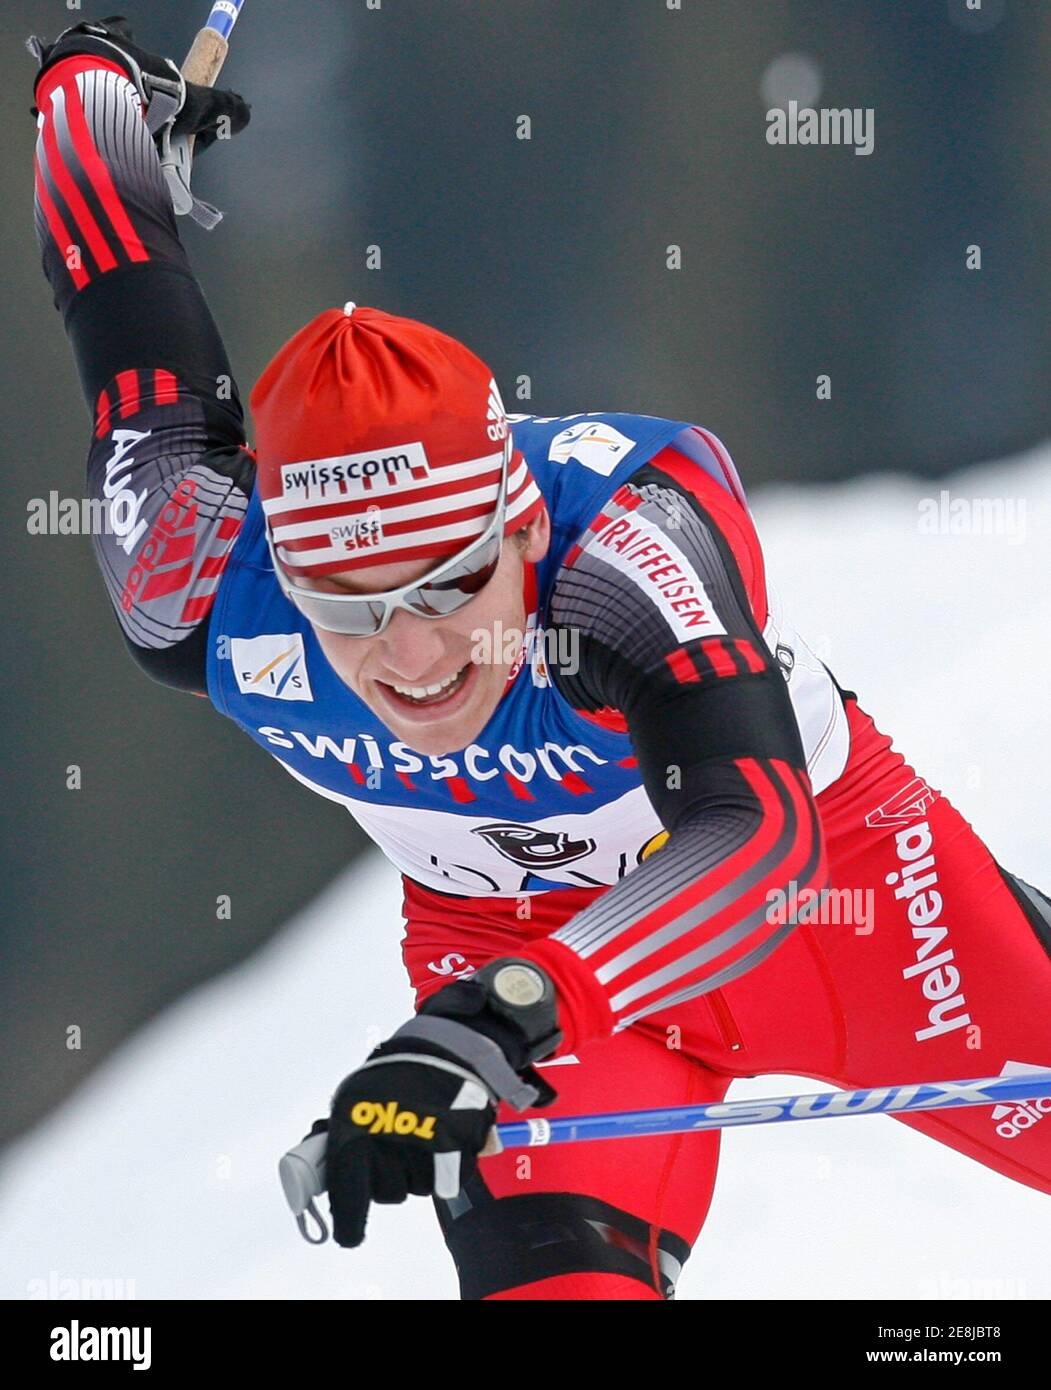 Toni Livers of Switzerland skies to victory during the men's FIS World Cup cross-country skiing 15 km classical individual race in Davos, February 3, 2007.  REUTERS/Miro Kuzmanovic  (SWITZERLAND) Stock Photo